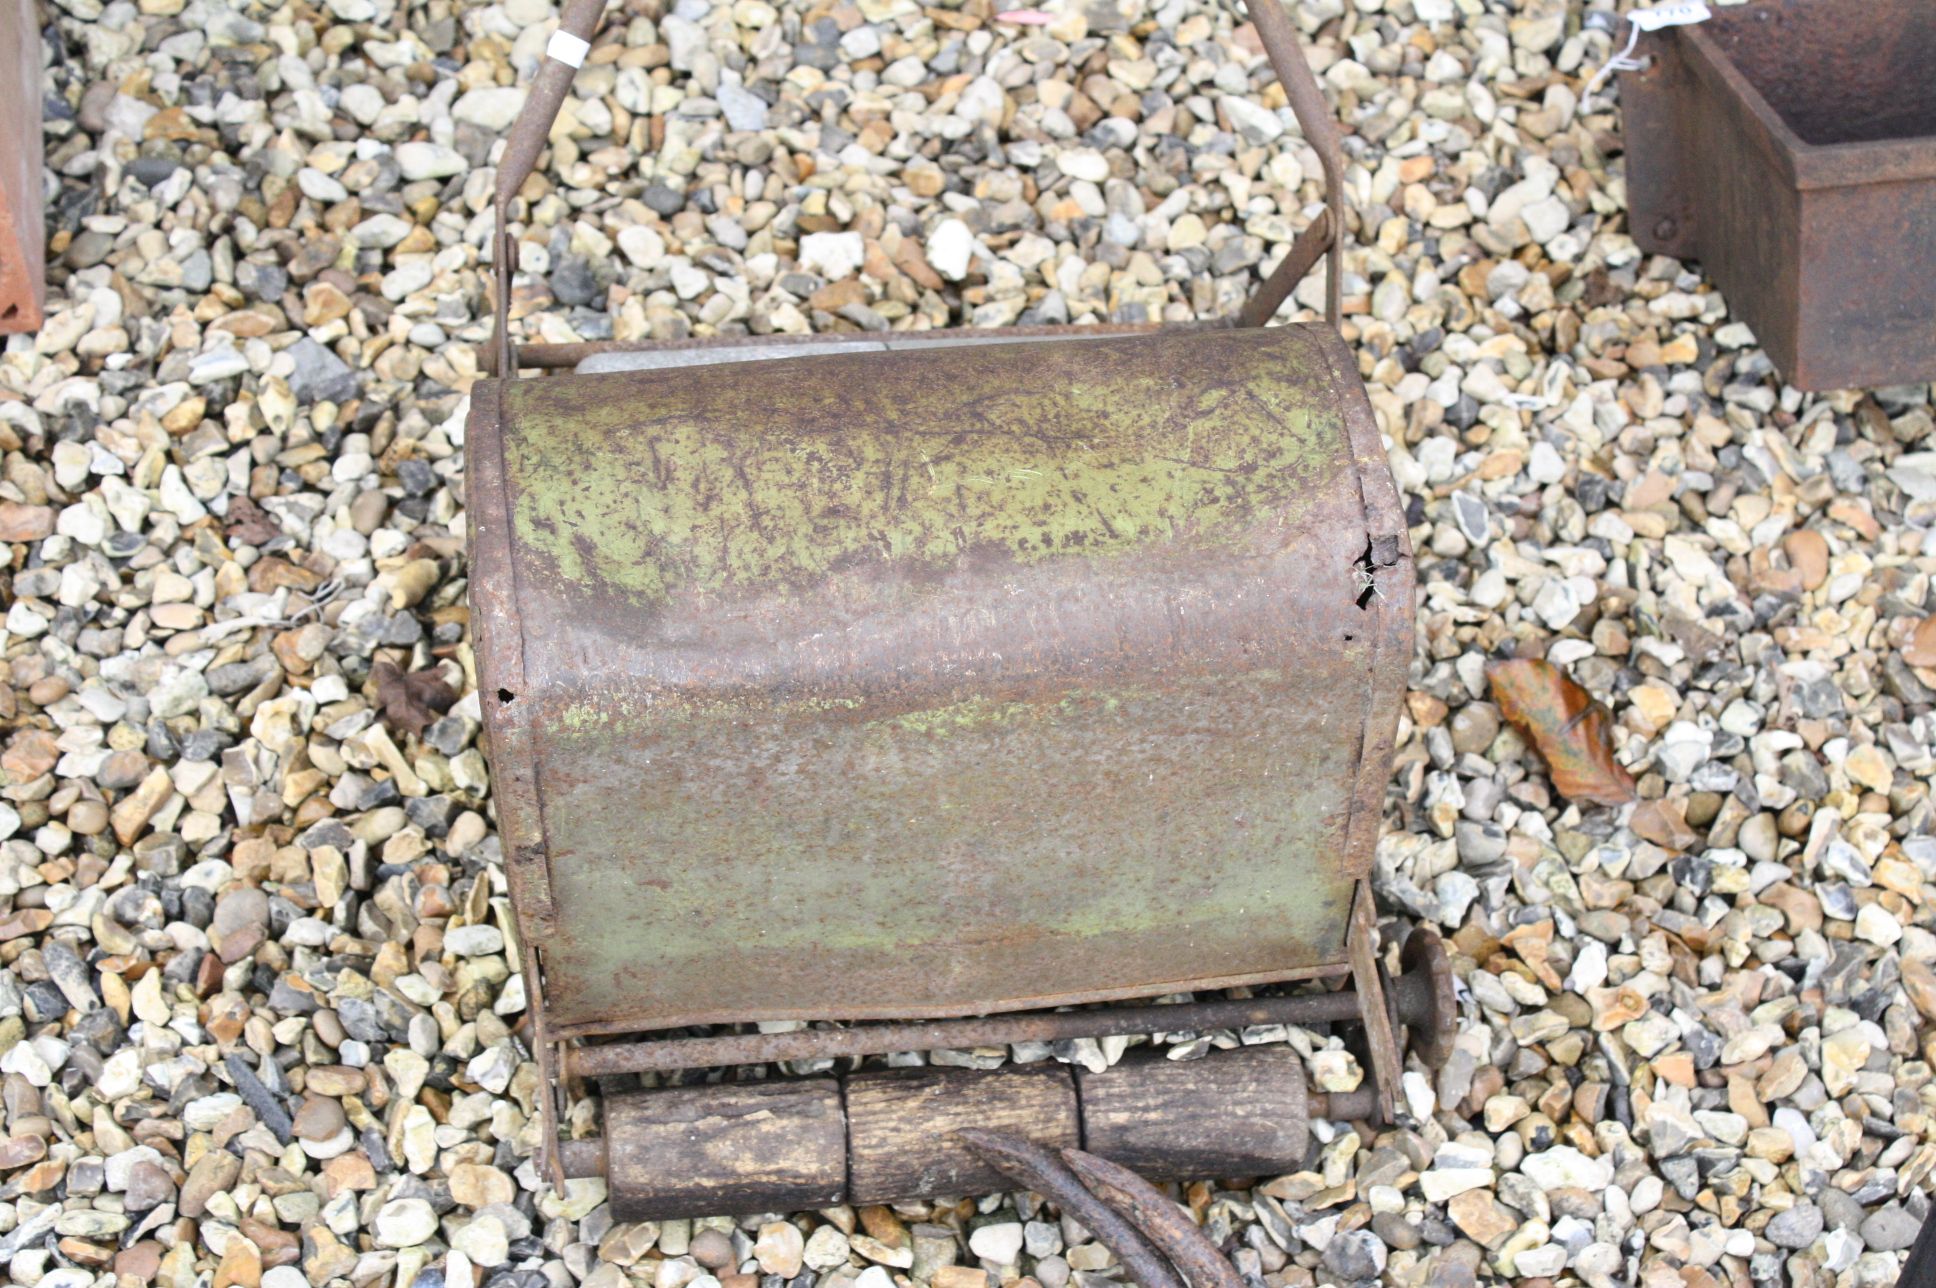 Mid 20th century ' Acme ' Mangle together with a Vintage Push-along Lawn Mowver - Image 2 of 3